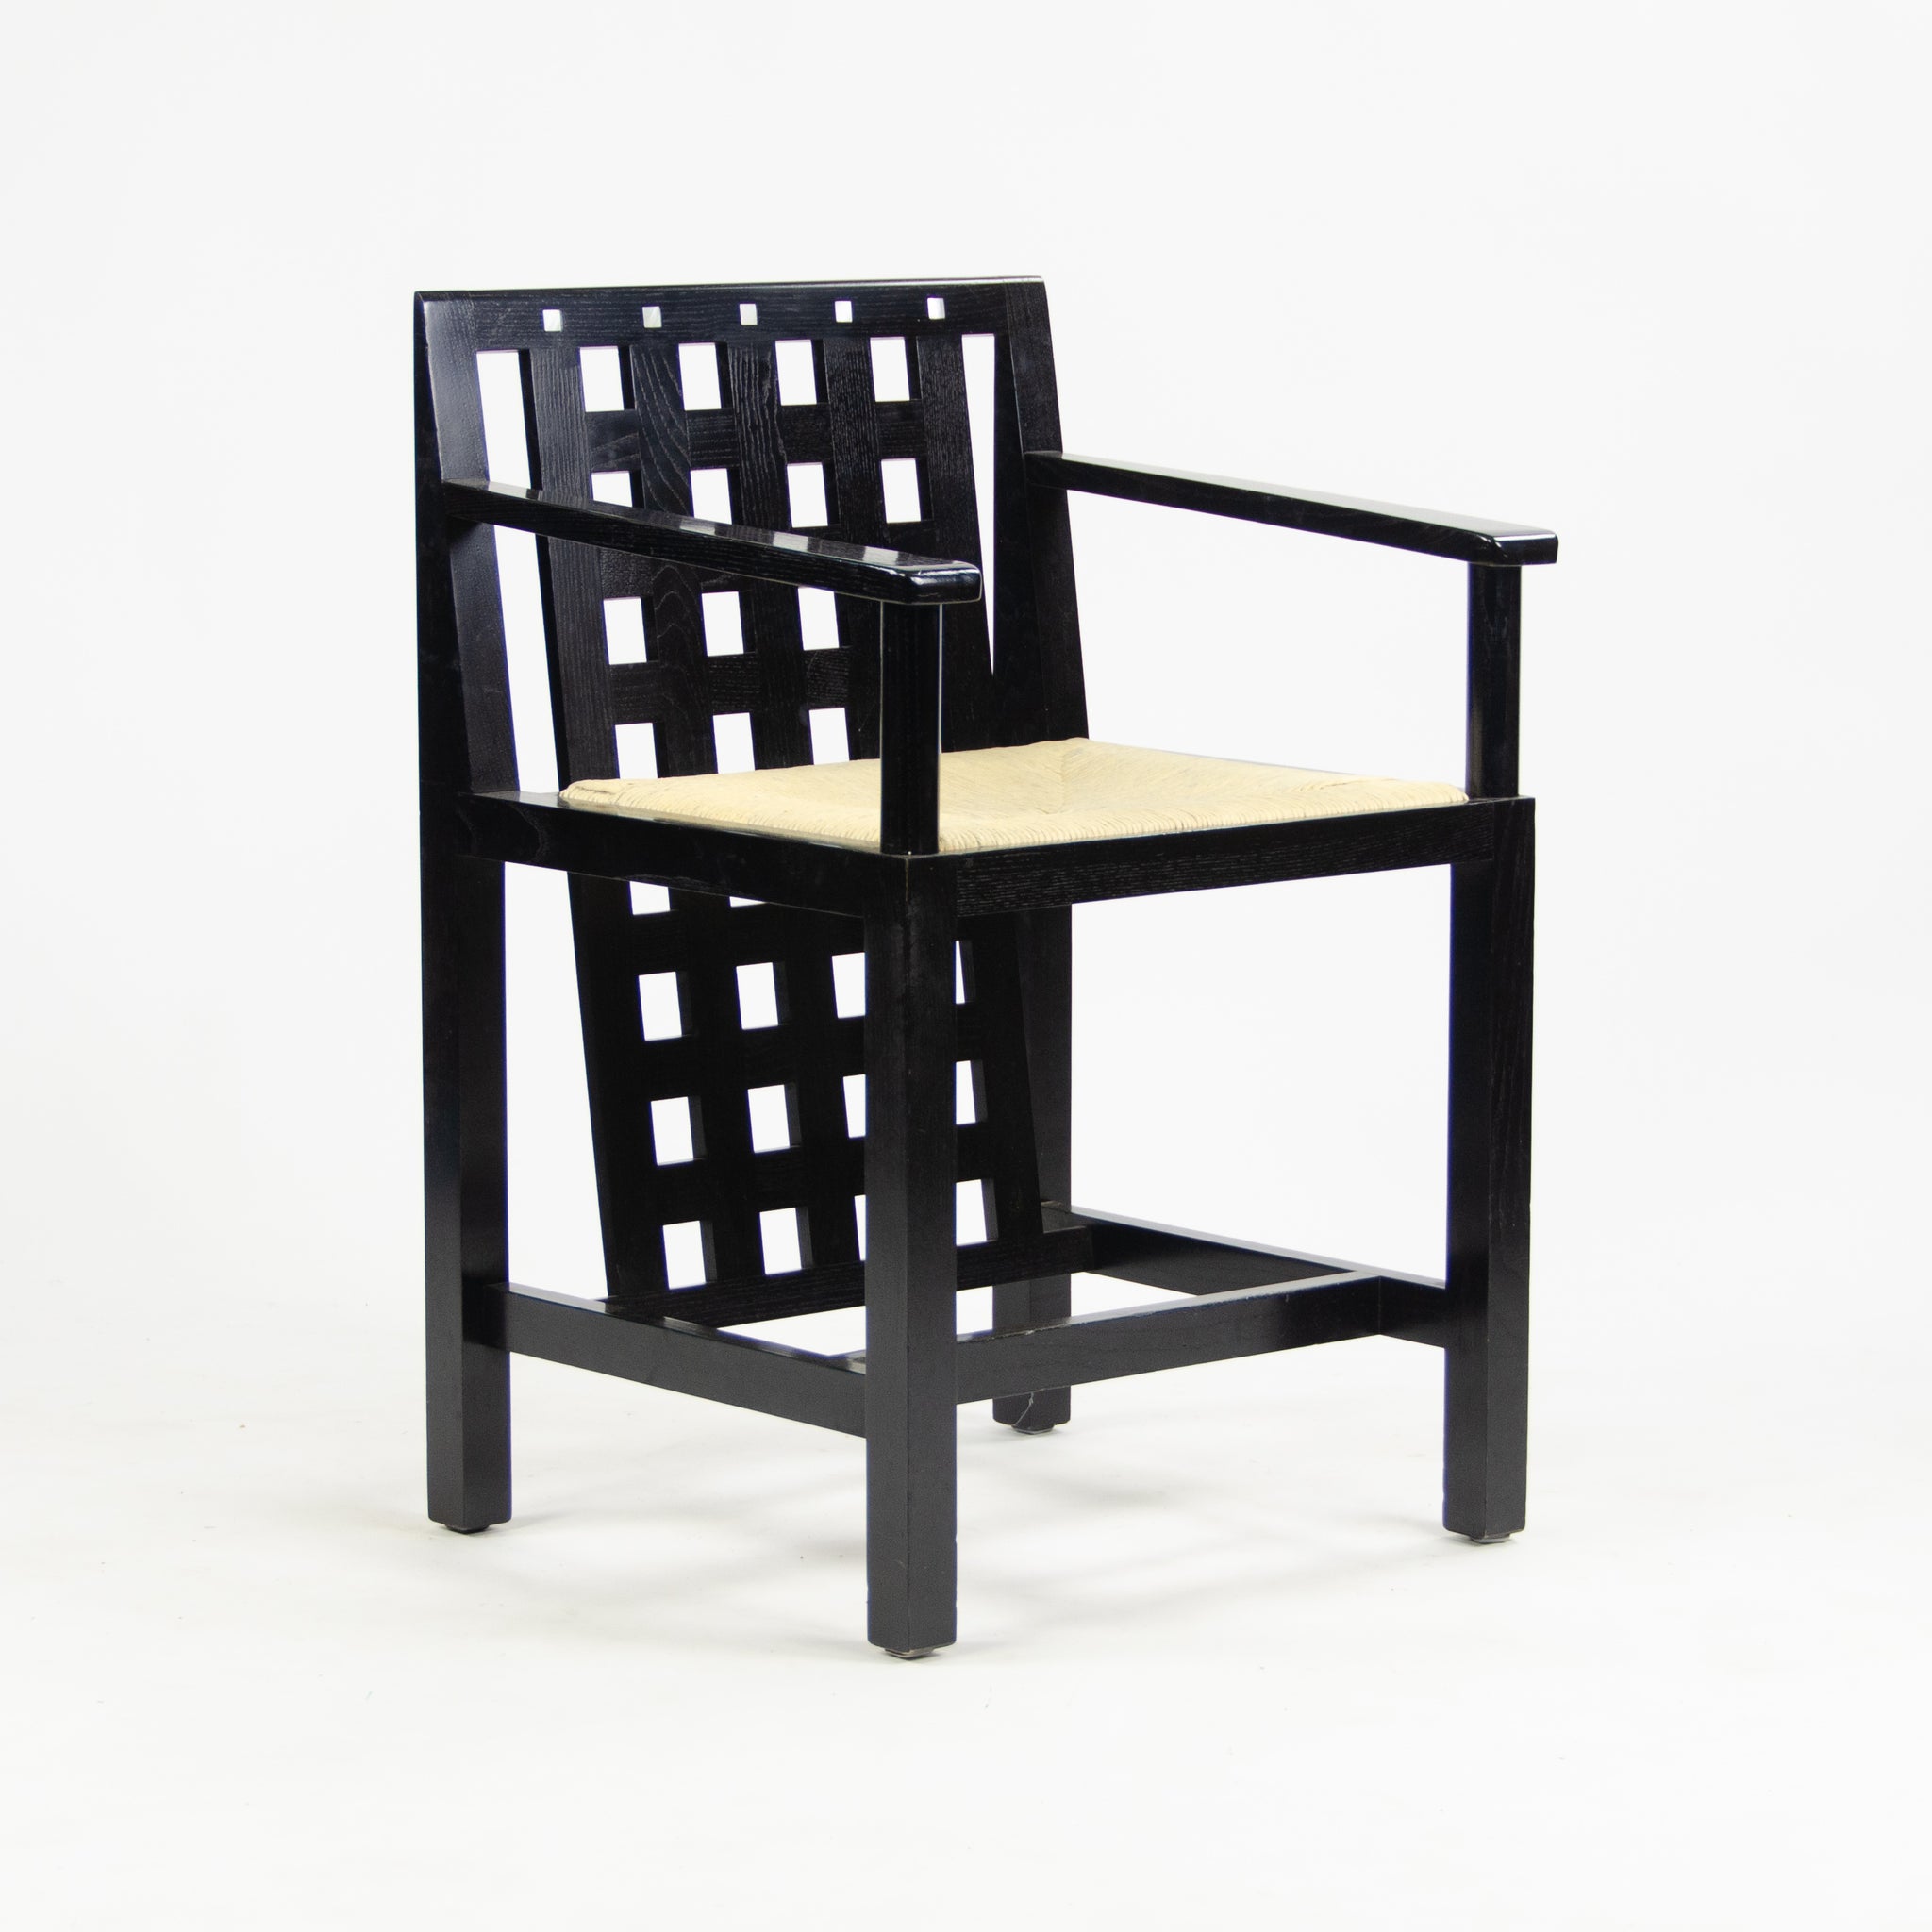 SOLD Charles Rennie Mackintosh Set of Six 324 DS3 Chairs + Dining Table Set Cassina